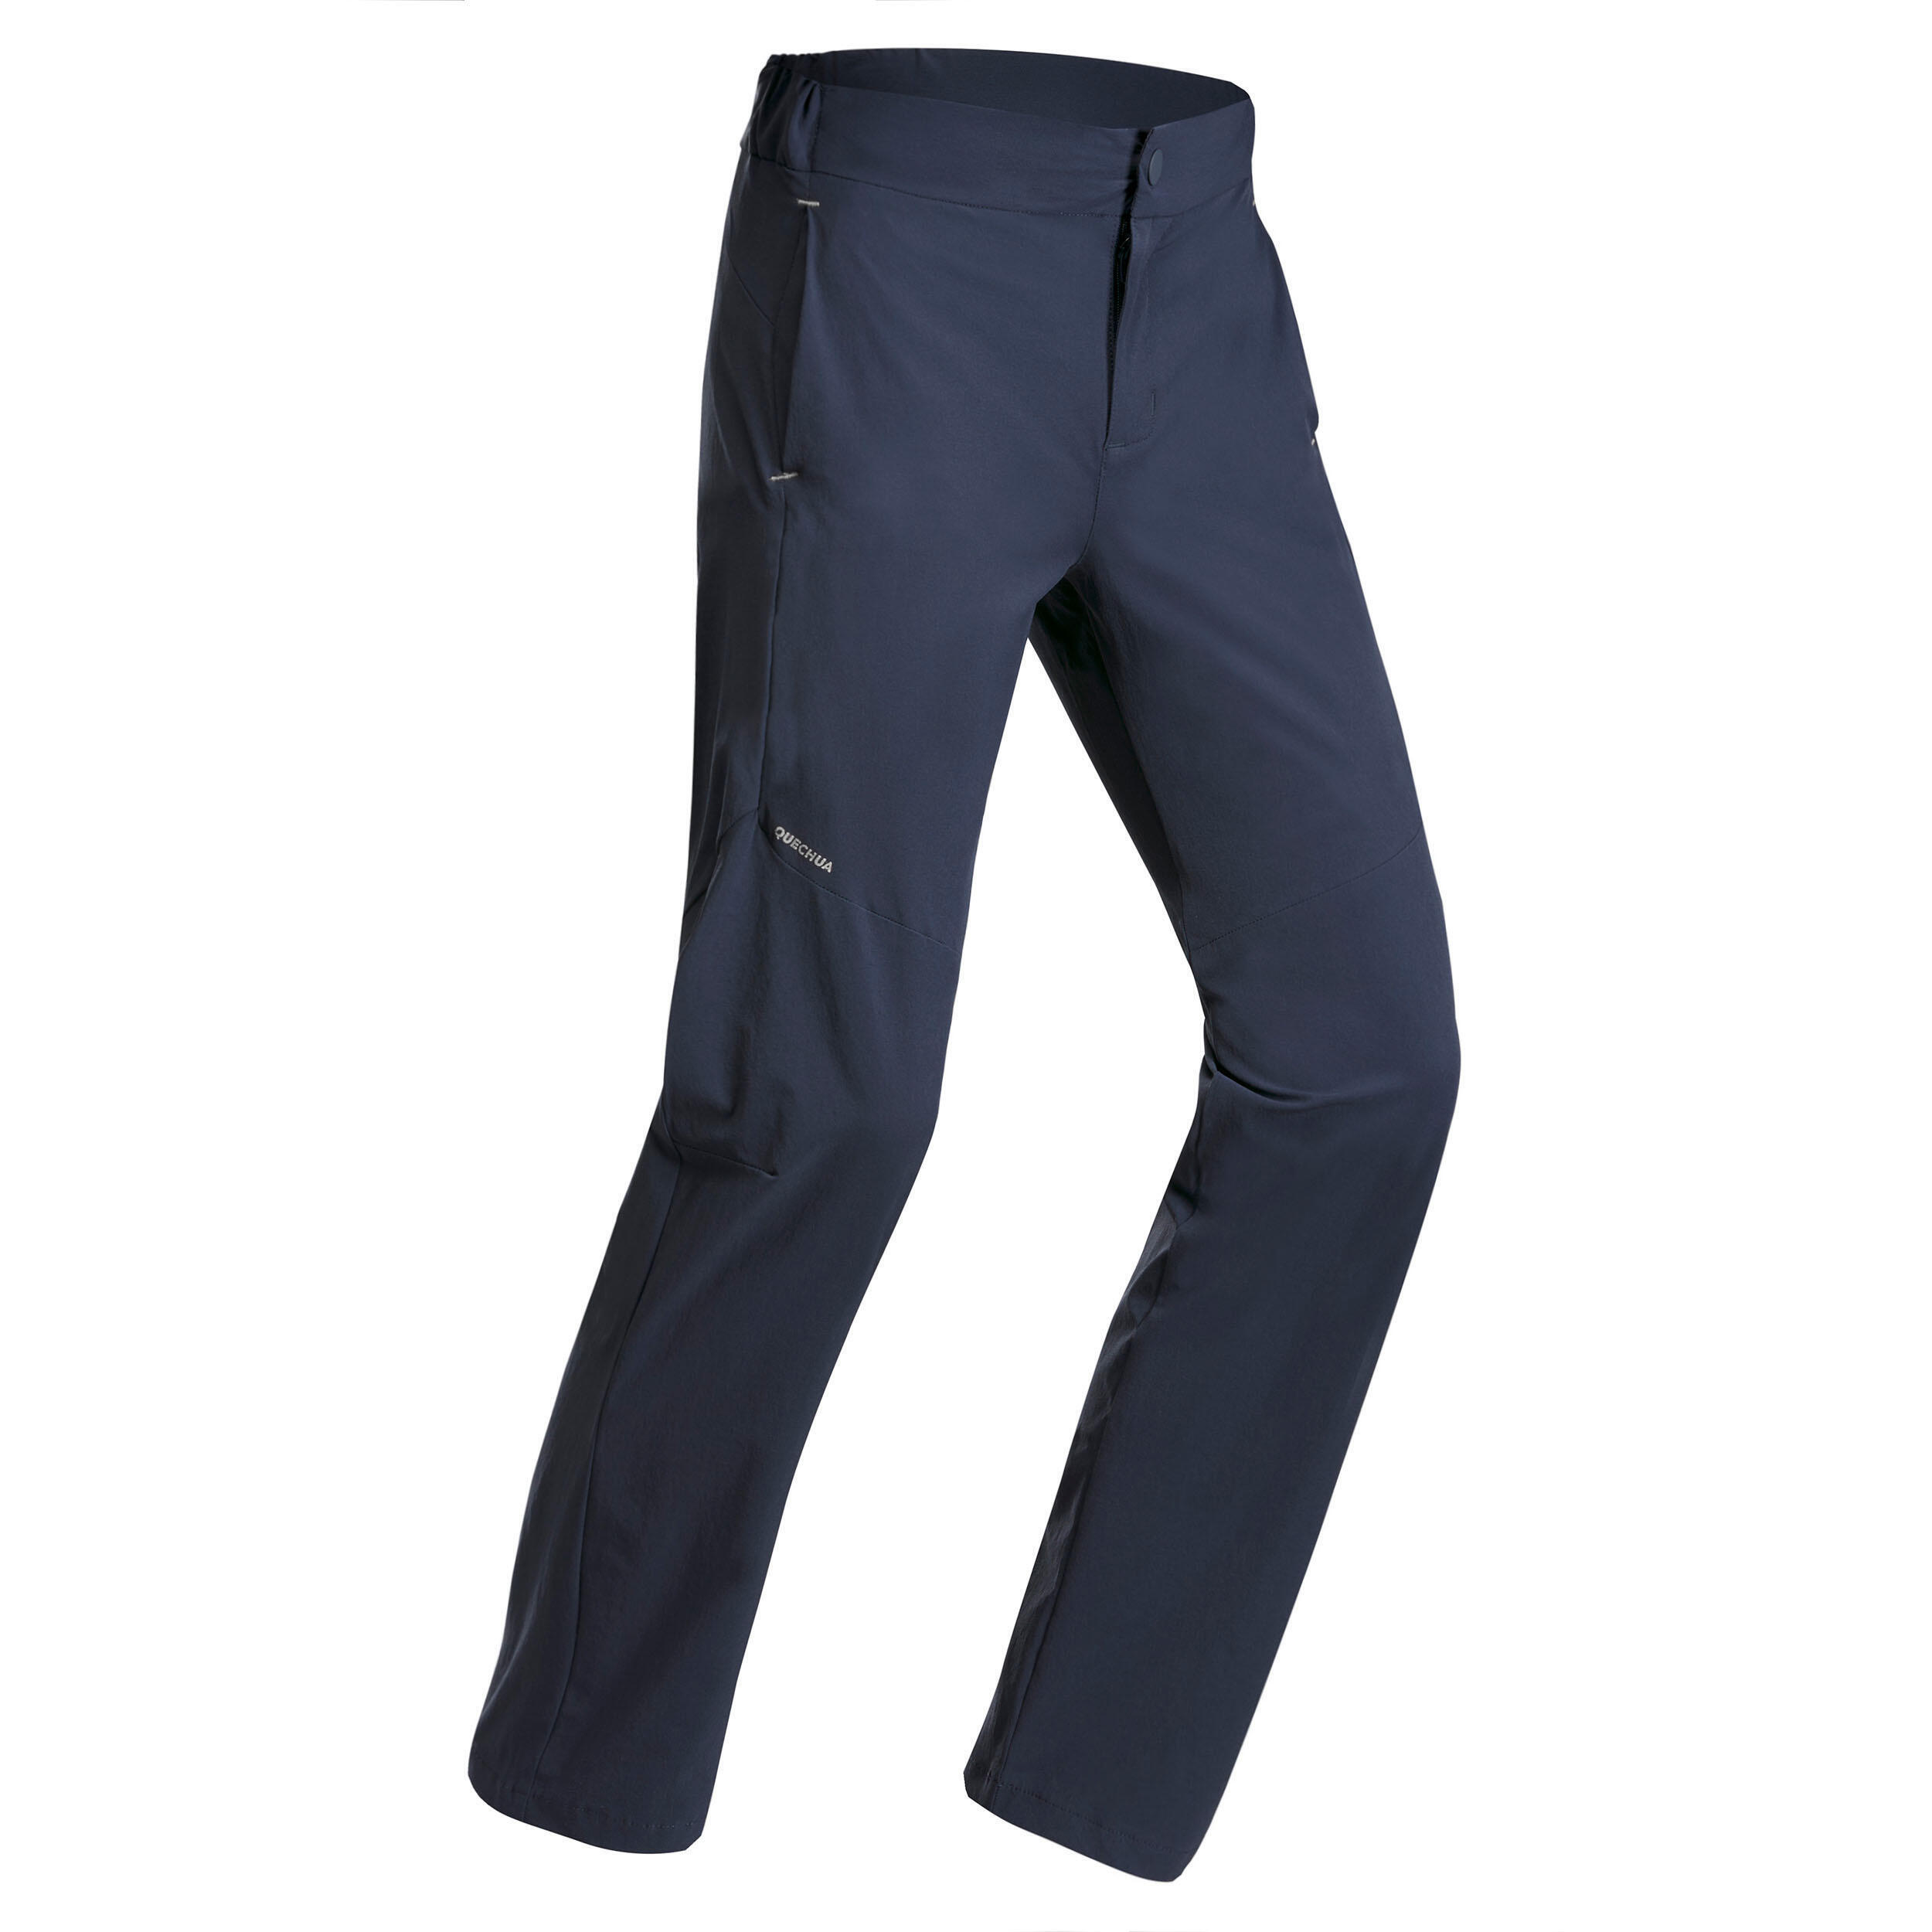 Kids’ Hiking Trousers - MH100 Aged 7-15 - Navy Blue 1/8